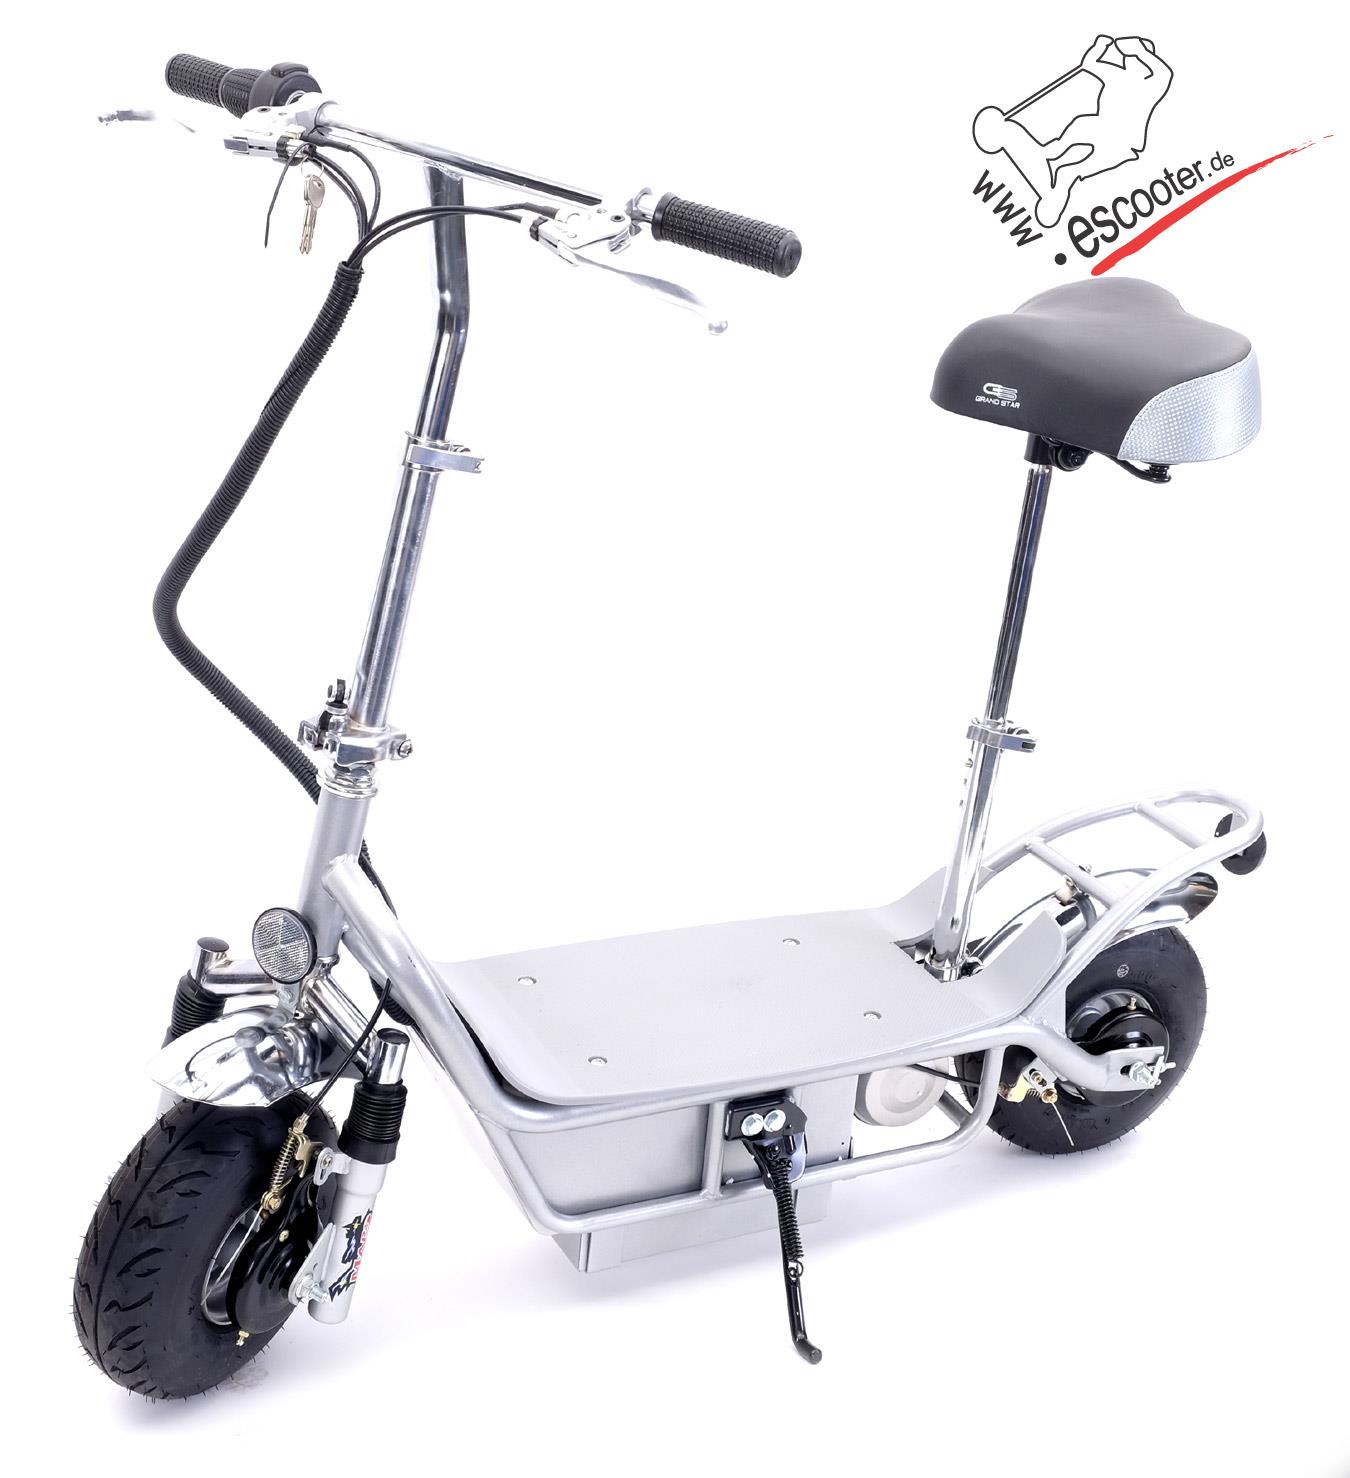 MARS 600 Top electric scooter with seat / without registration in Germany